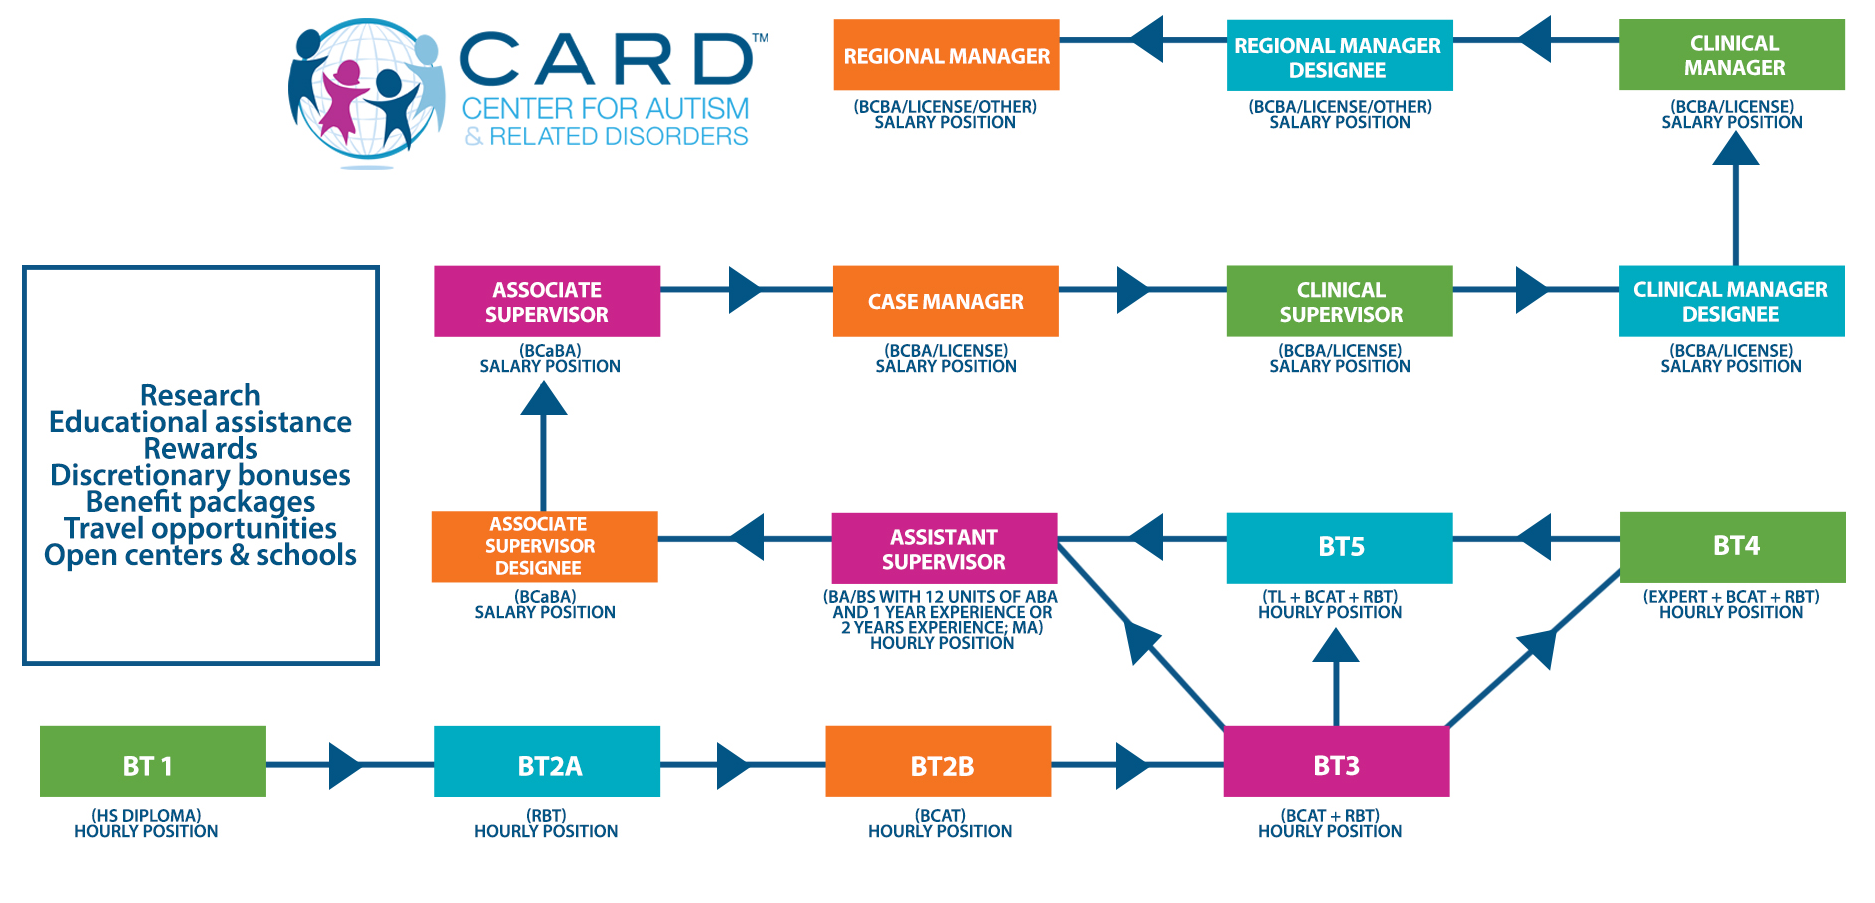 CARD clinical careers advancement infographic